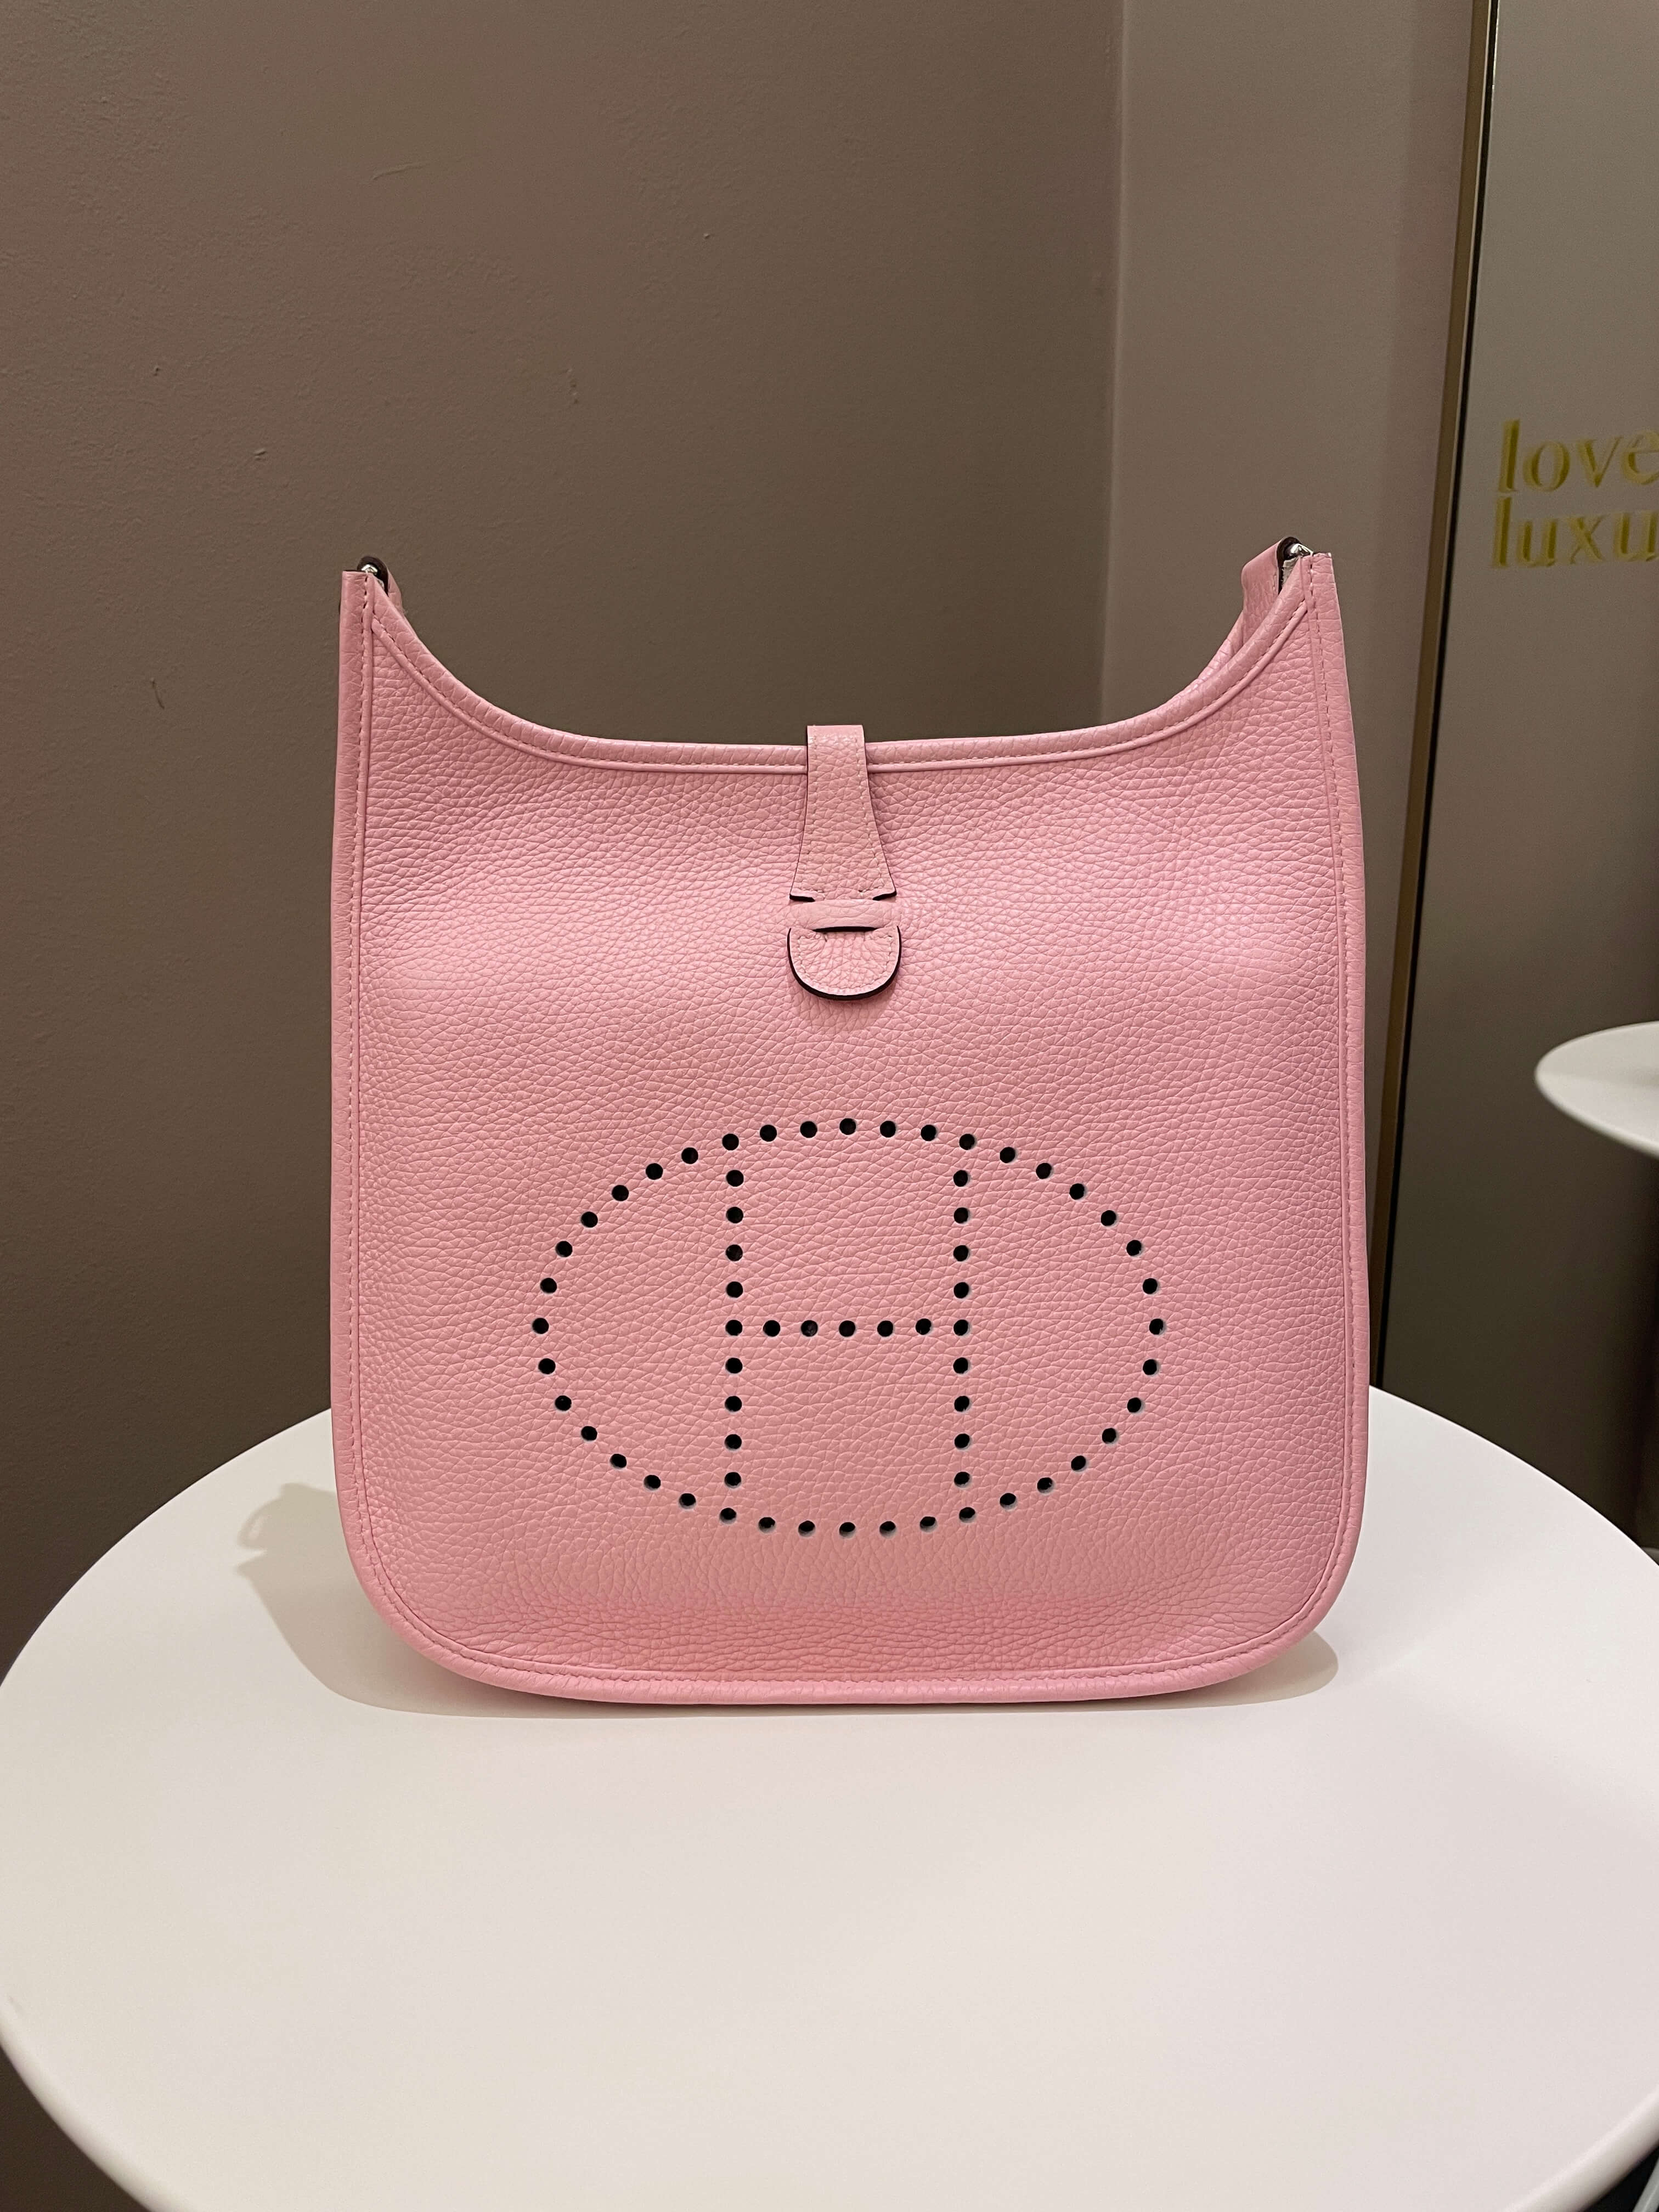 In love with Hermes pink.